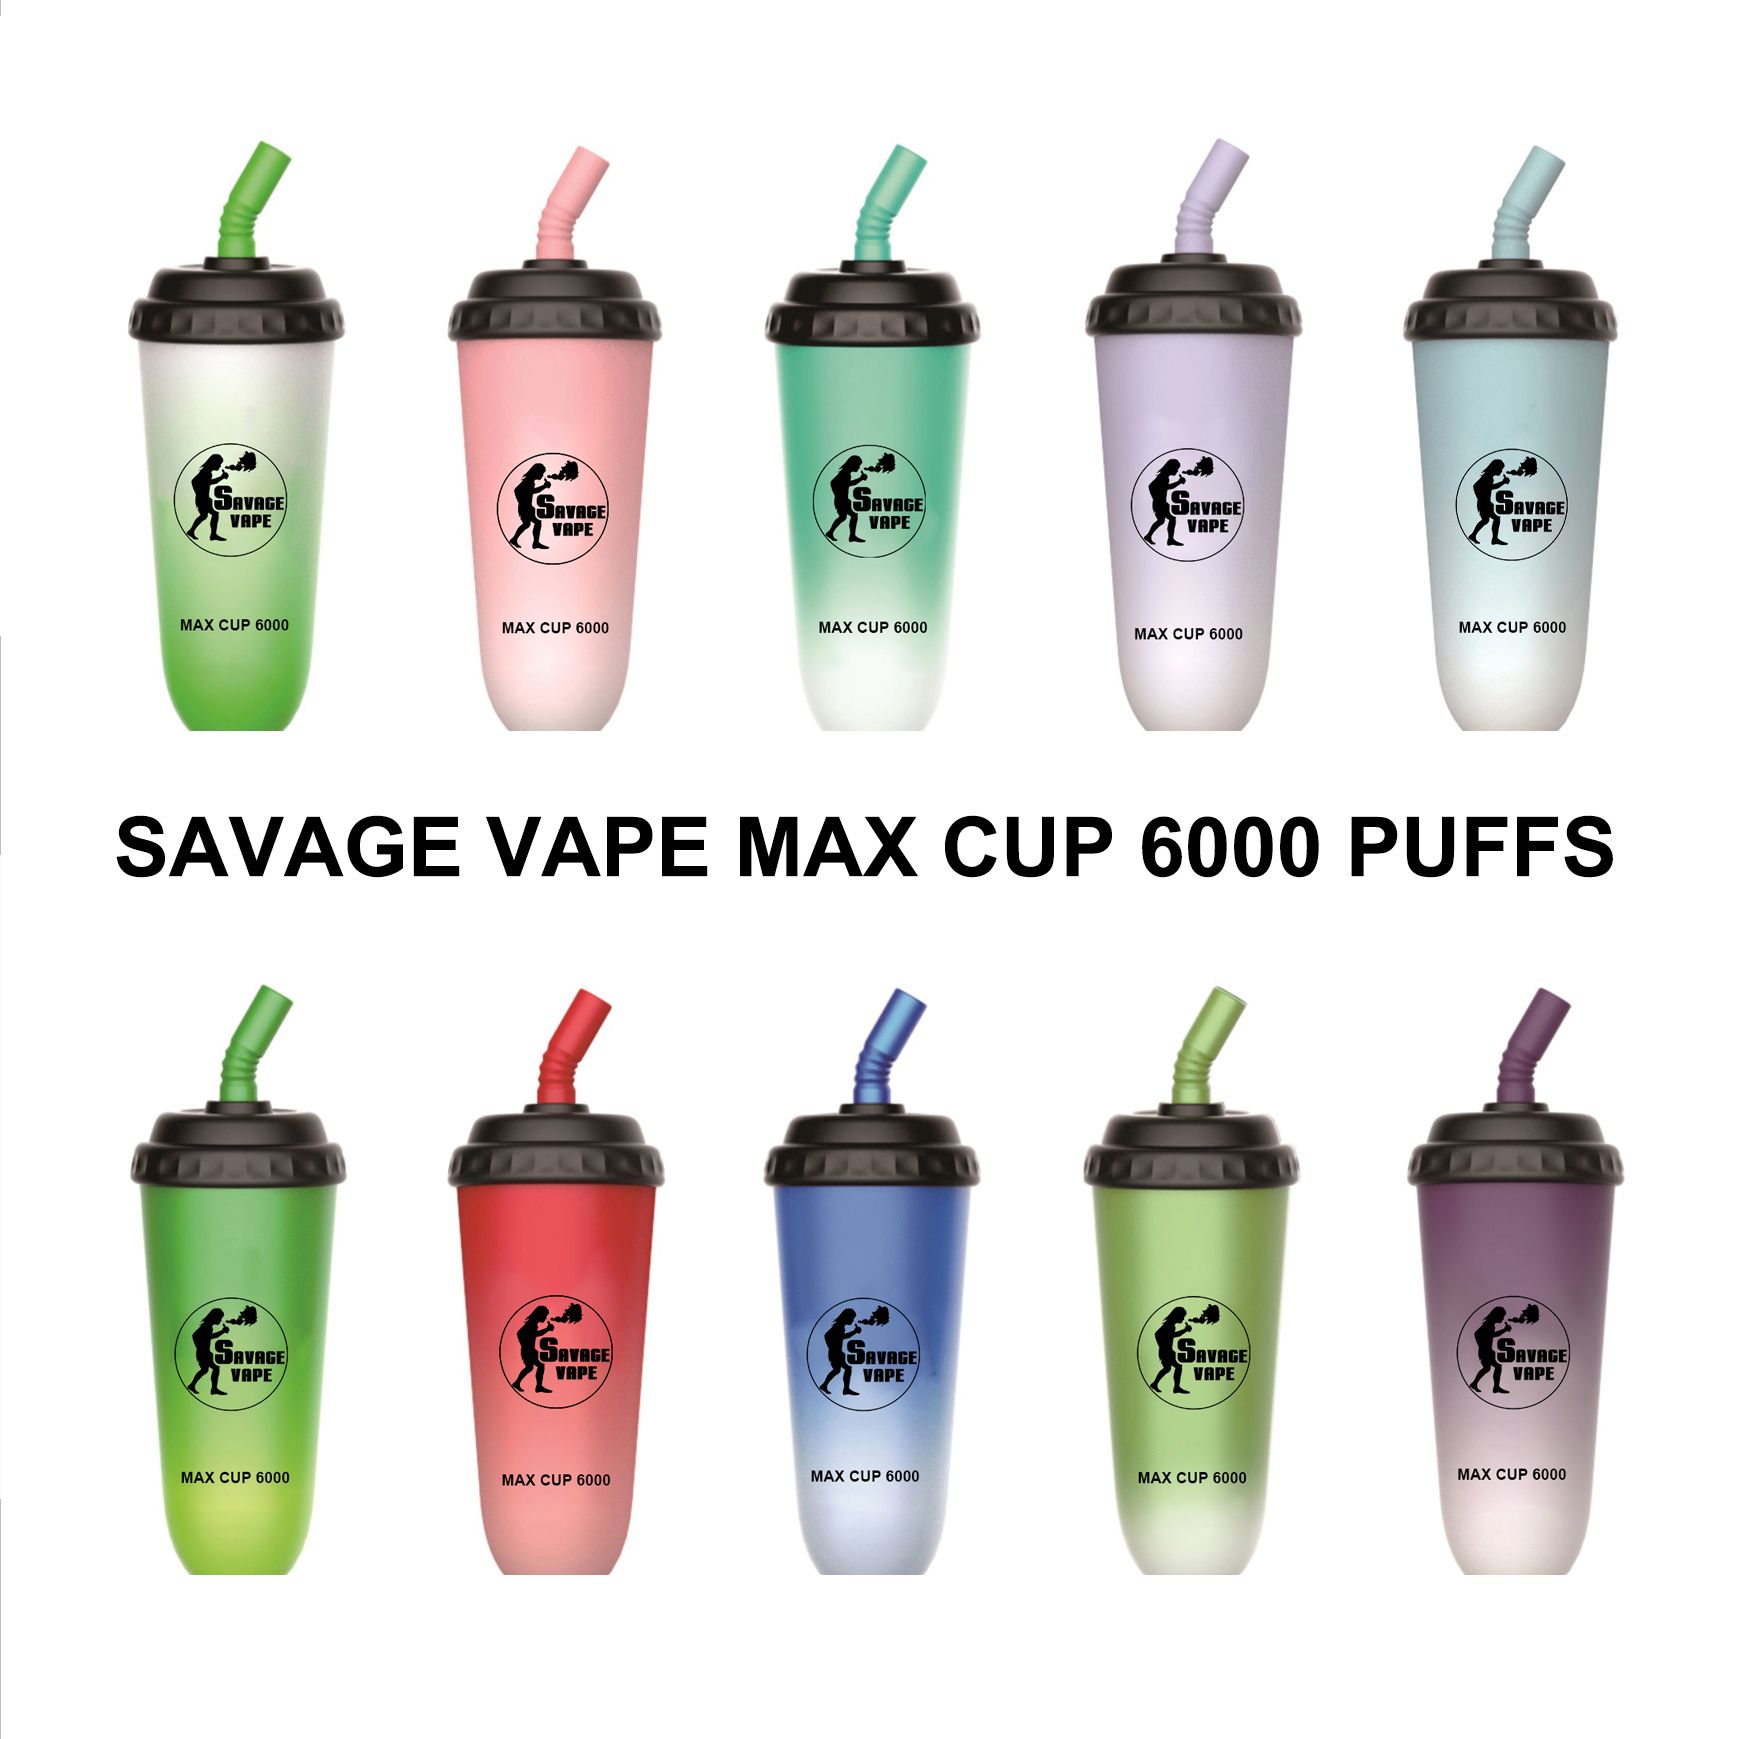 MAX CUP 6000-Tell us your colors